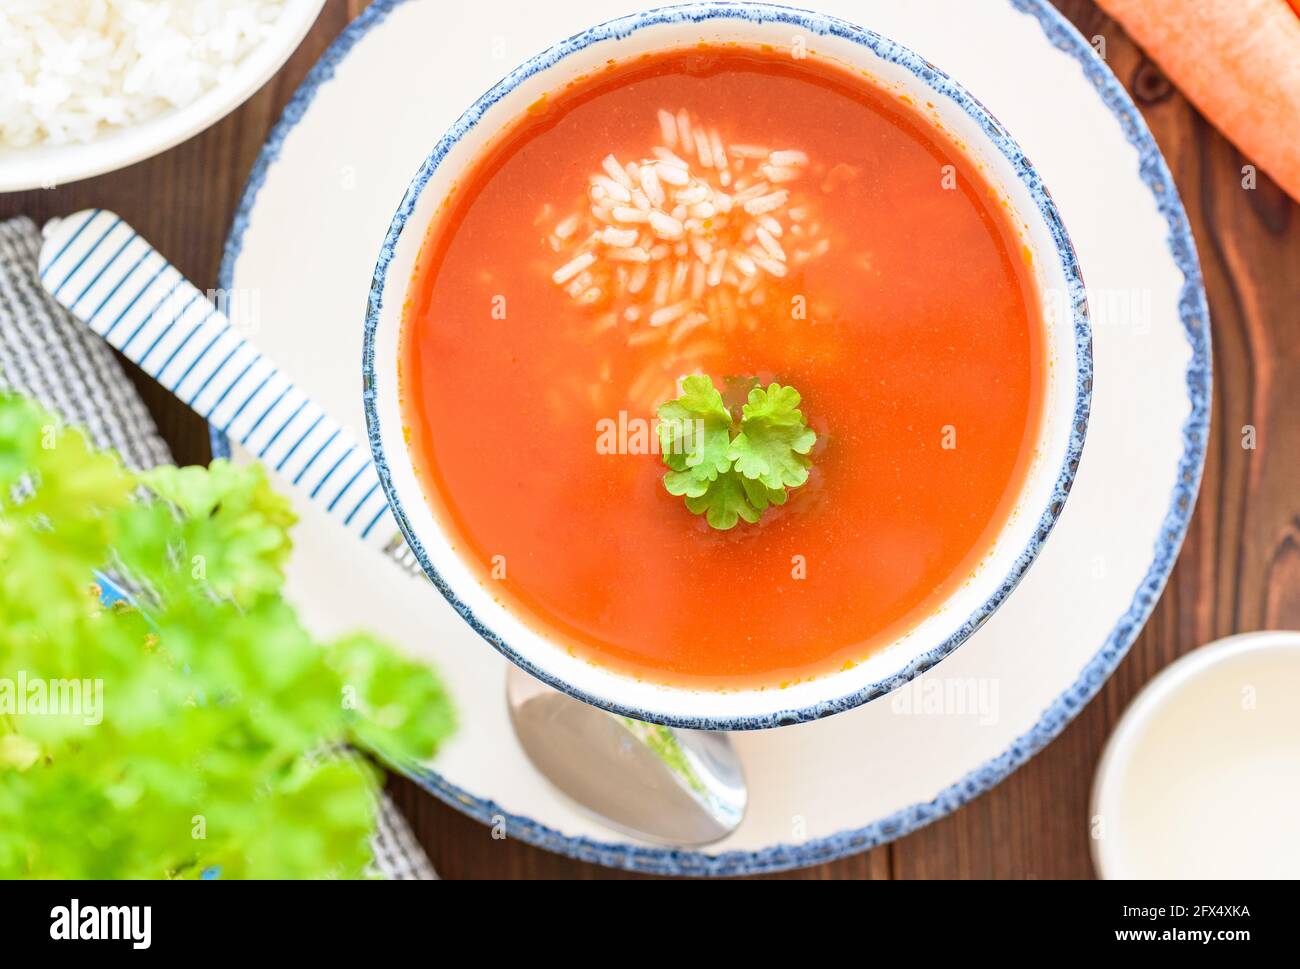 Bright, clean close-up of a bowl of tomato soup with rice, happy, spring colors, top view Stock Photo